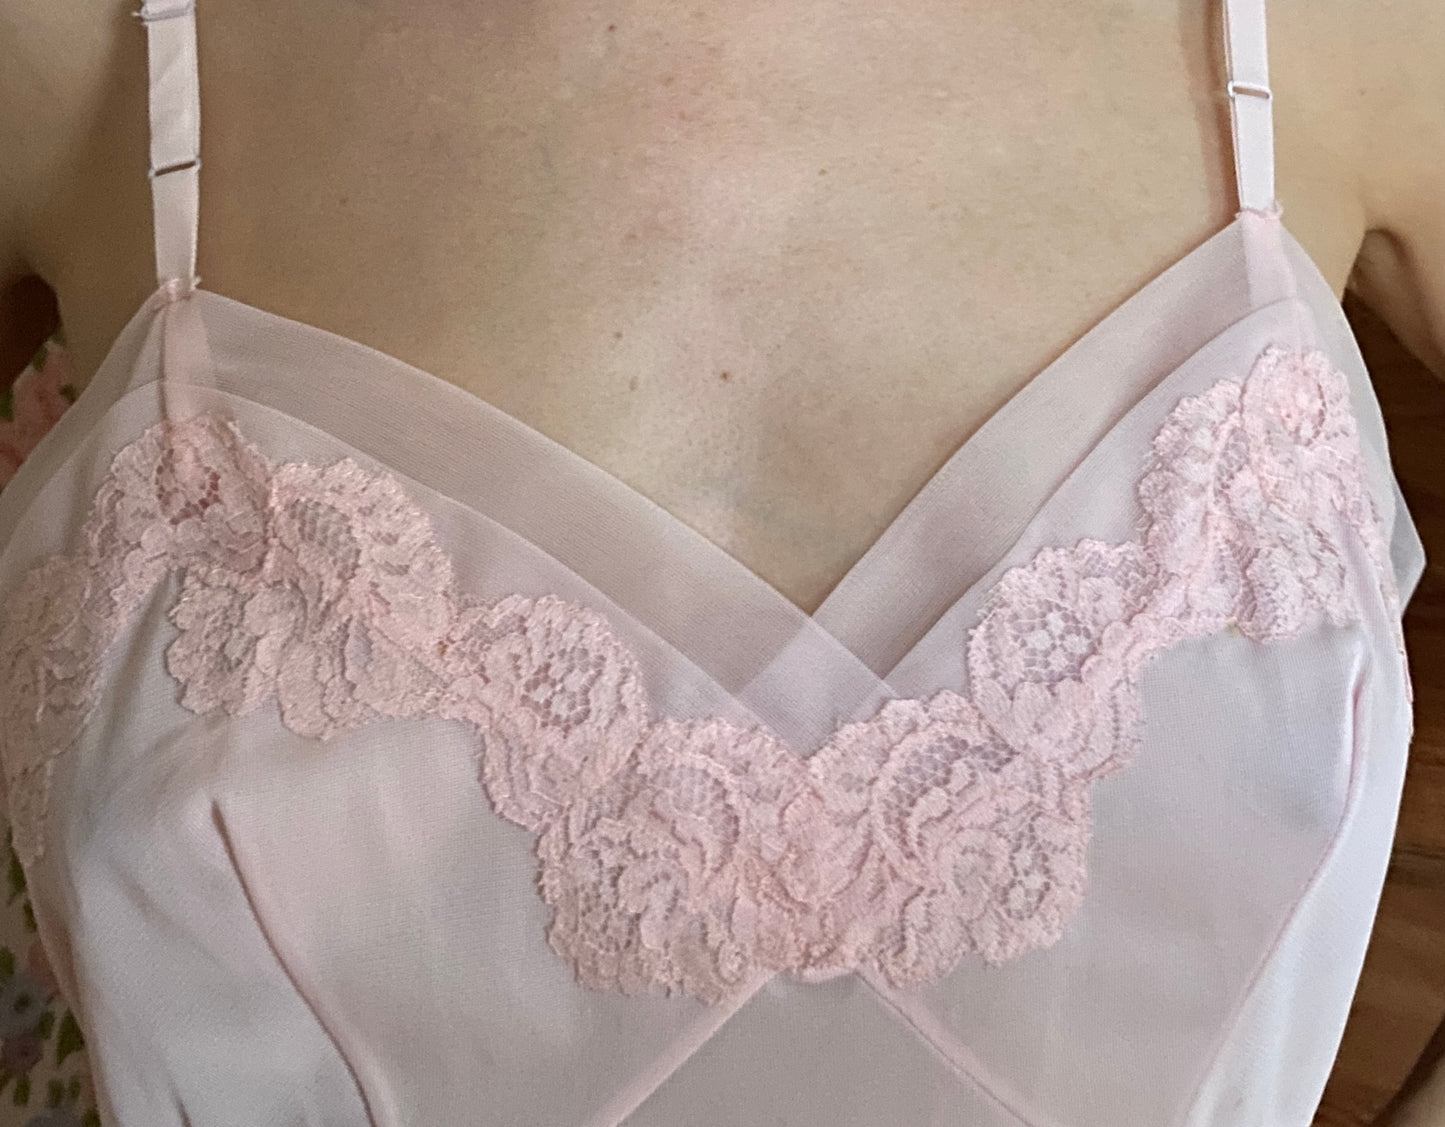 Pink Slip by Wosley Lingerie of England, Bust: 38”